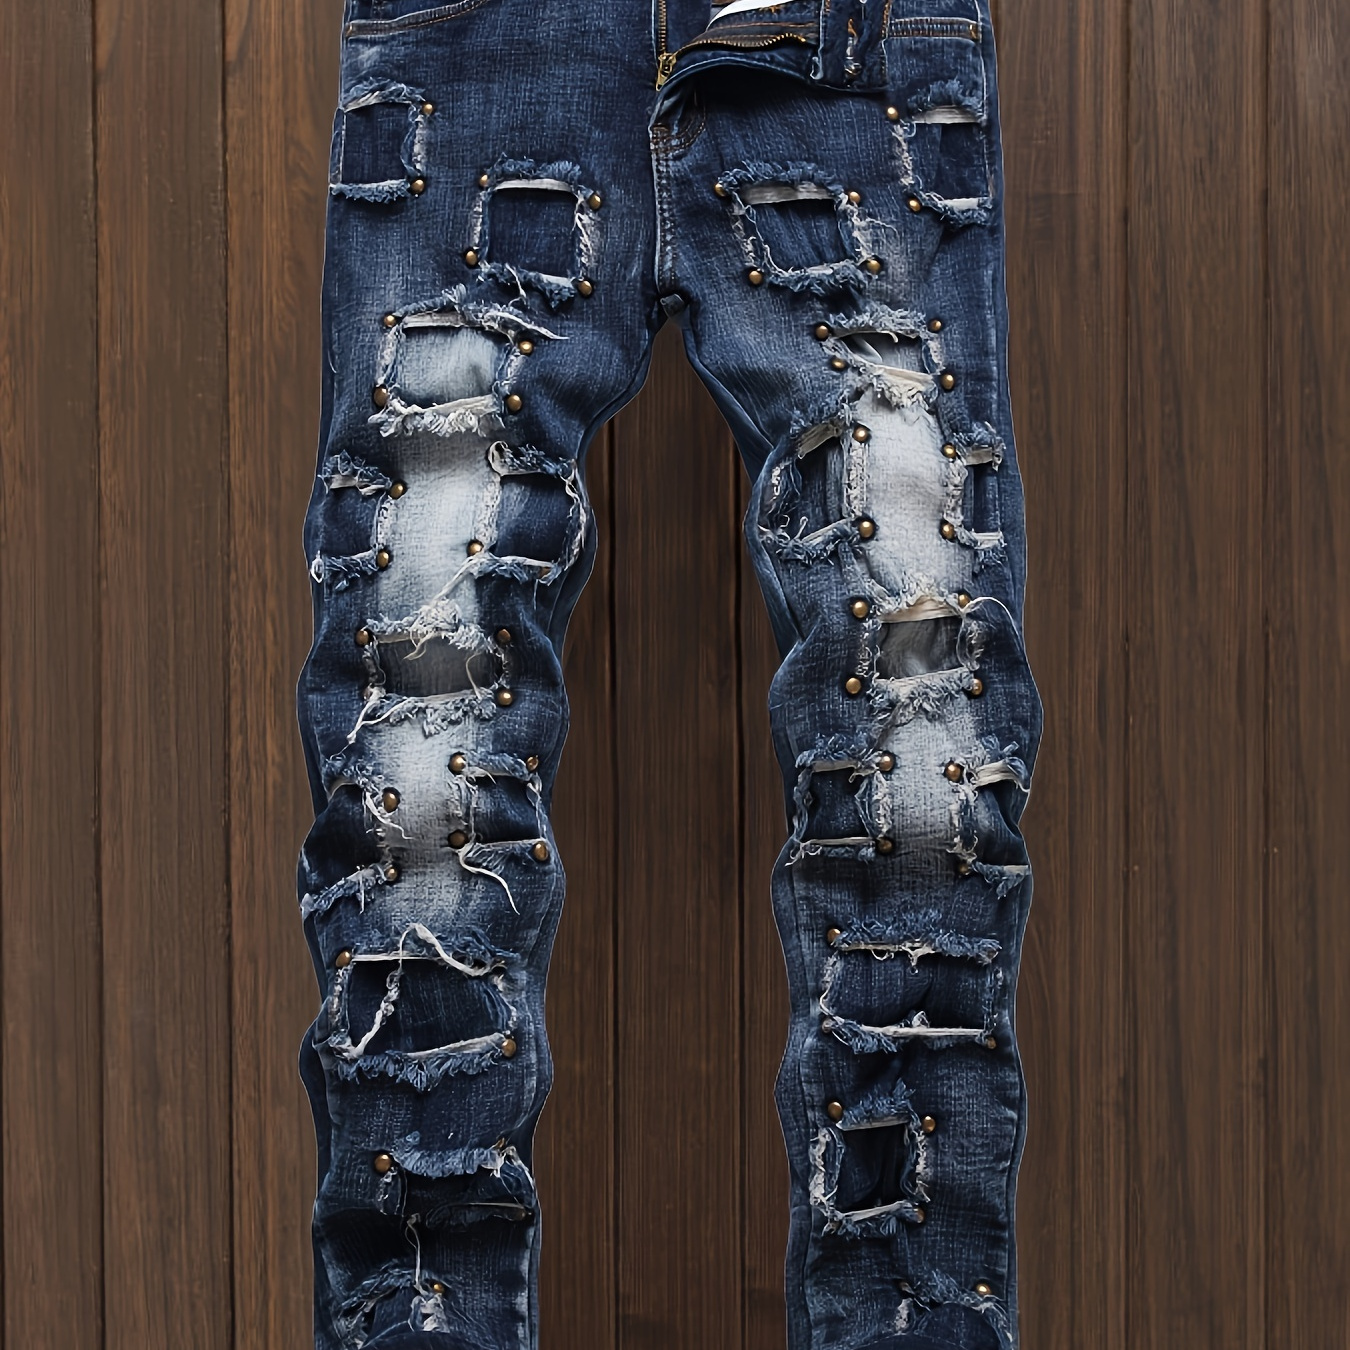 

New Stylish Jeans Slim Fit Stretch Ripped Patched Men's Jeans